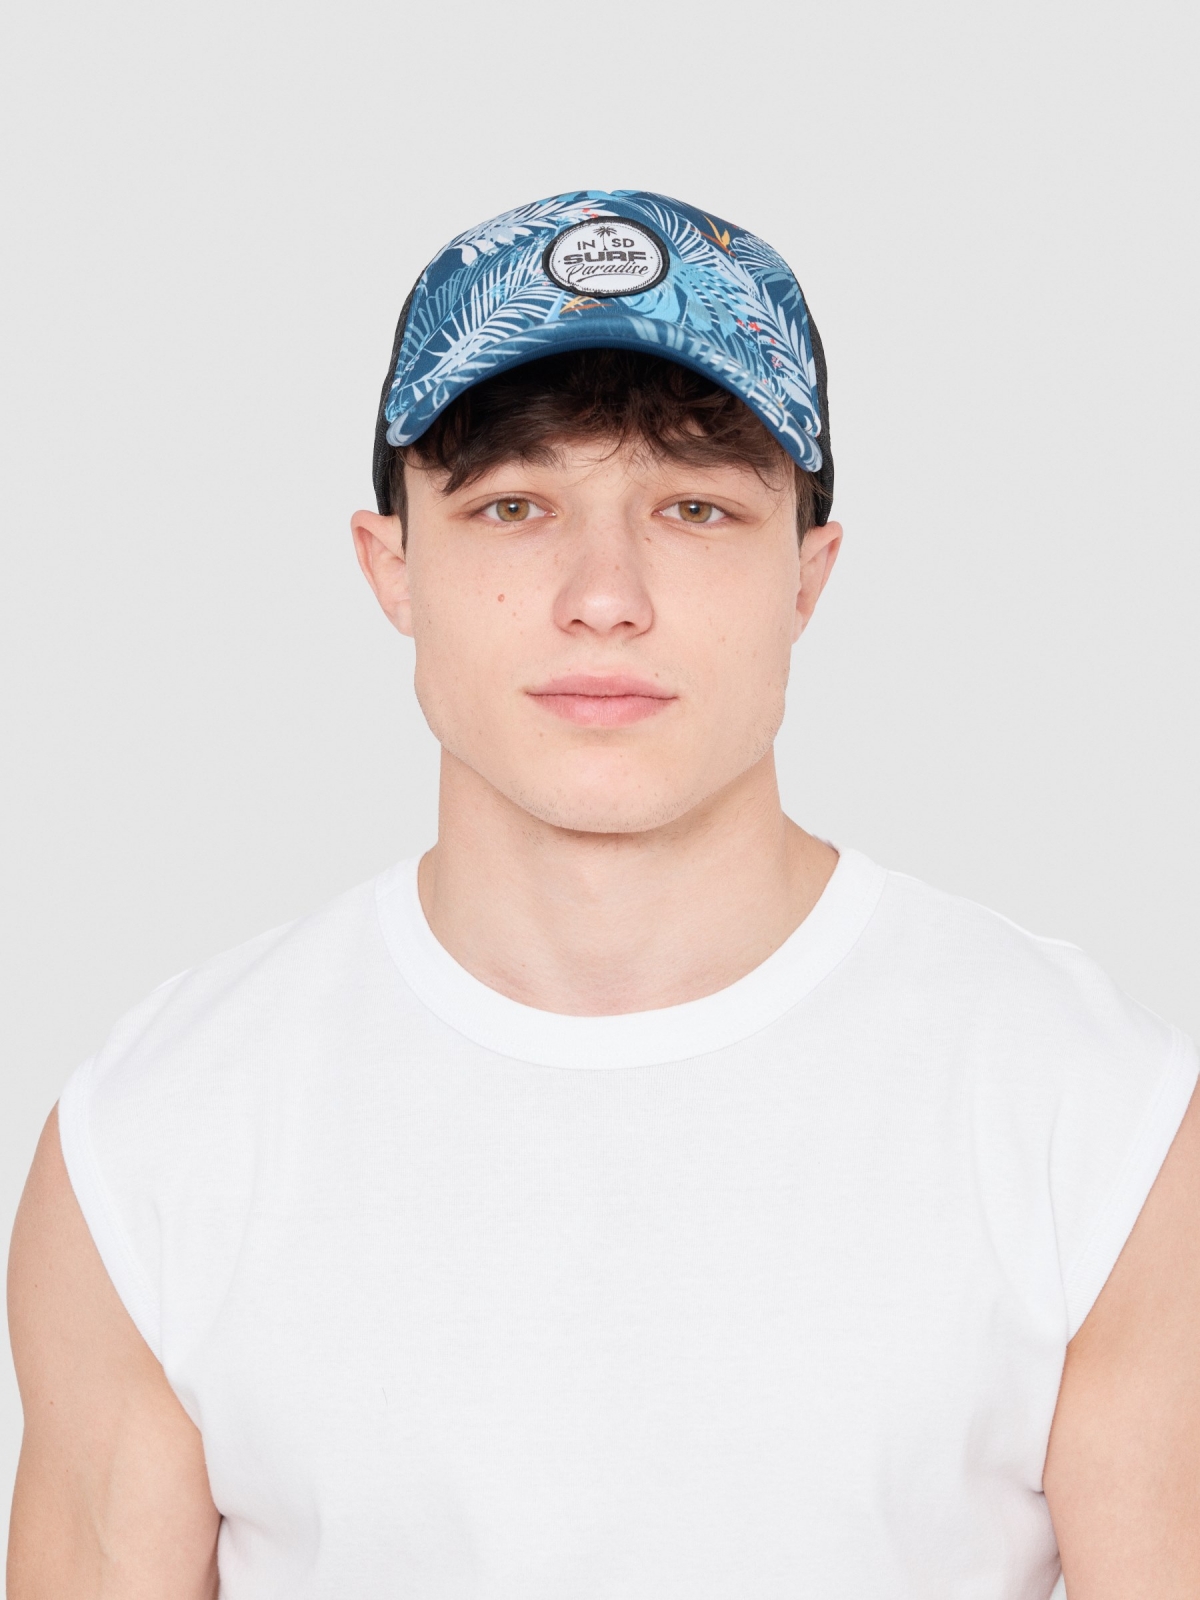 Surf trucker cap blue with a model